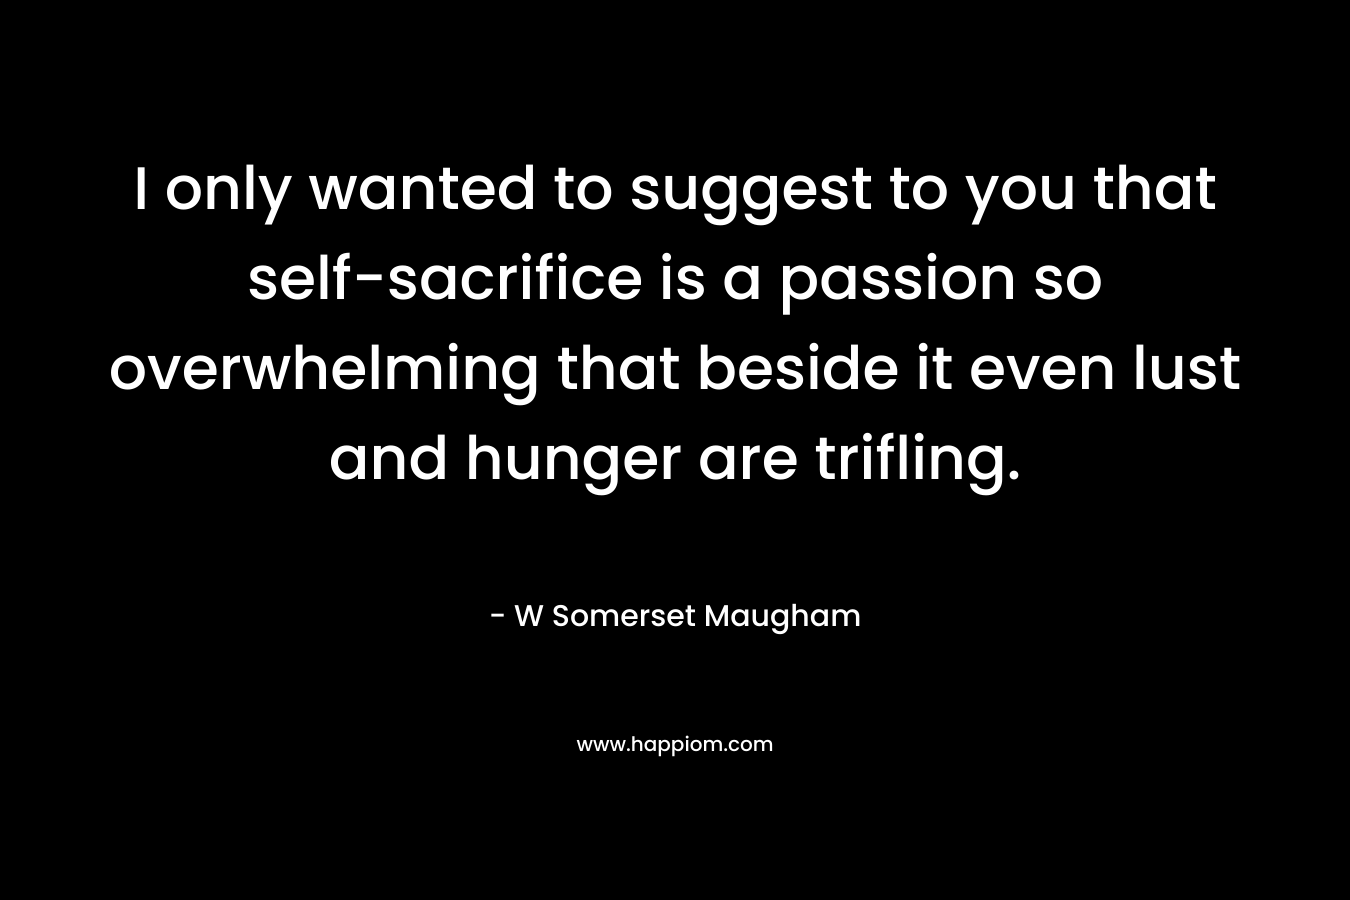 I only wanted to suggest to you that self-sacrifice is a passion so overwhelming that beside it even lust and hunger are trifling.